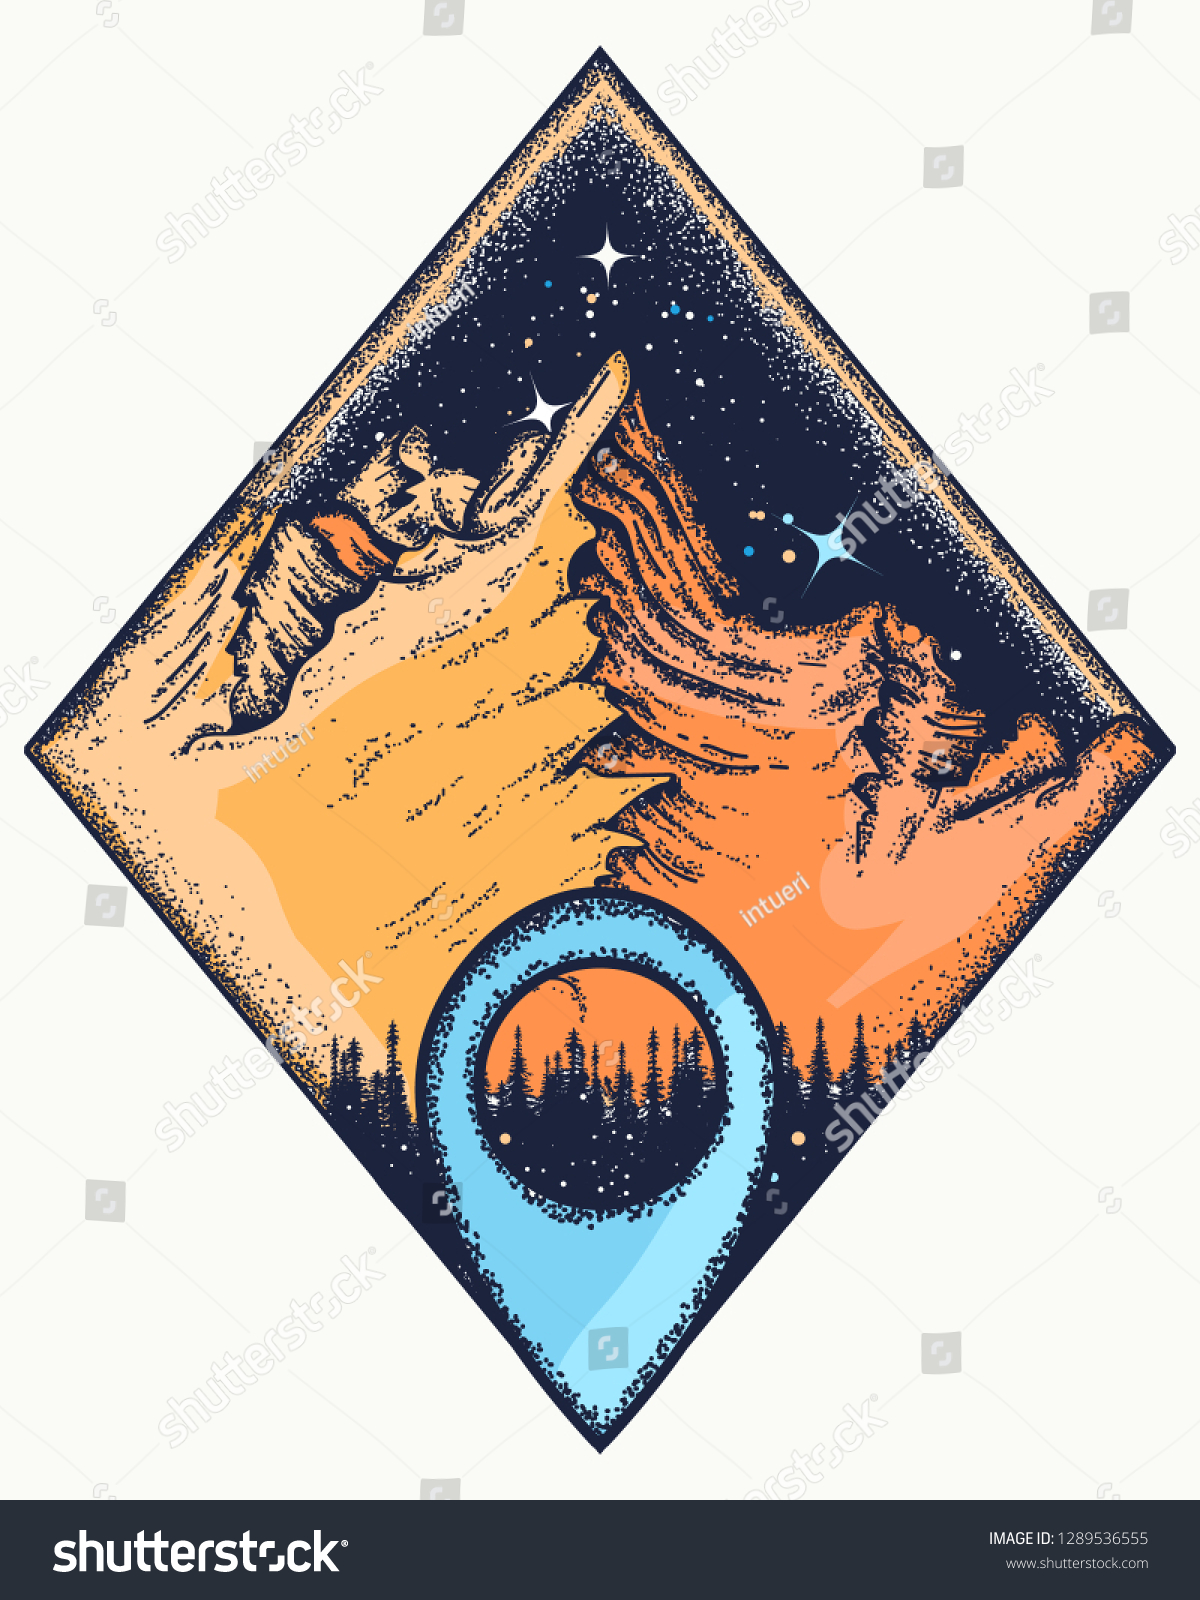 Stock Vector Mountains And Map Pointer T Shirt Design Symbol Of Climbing Camping Great Outdoors Tourism 1289536555 